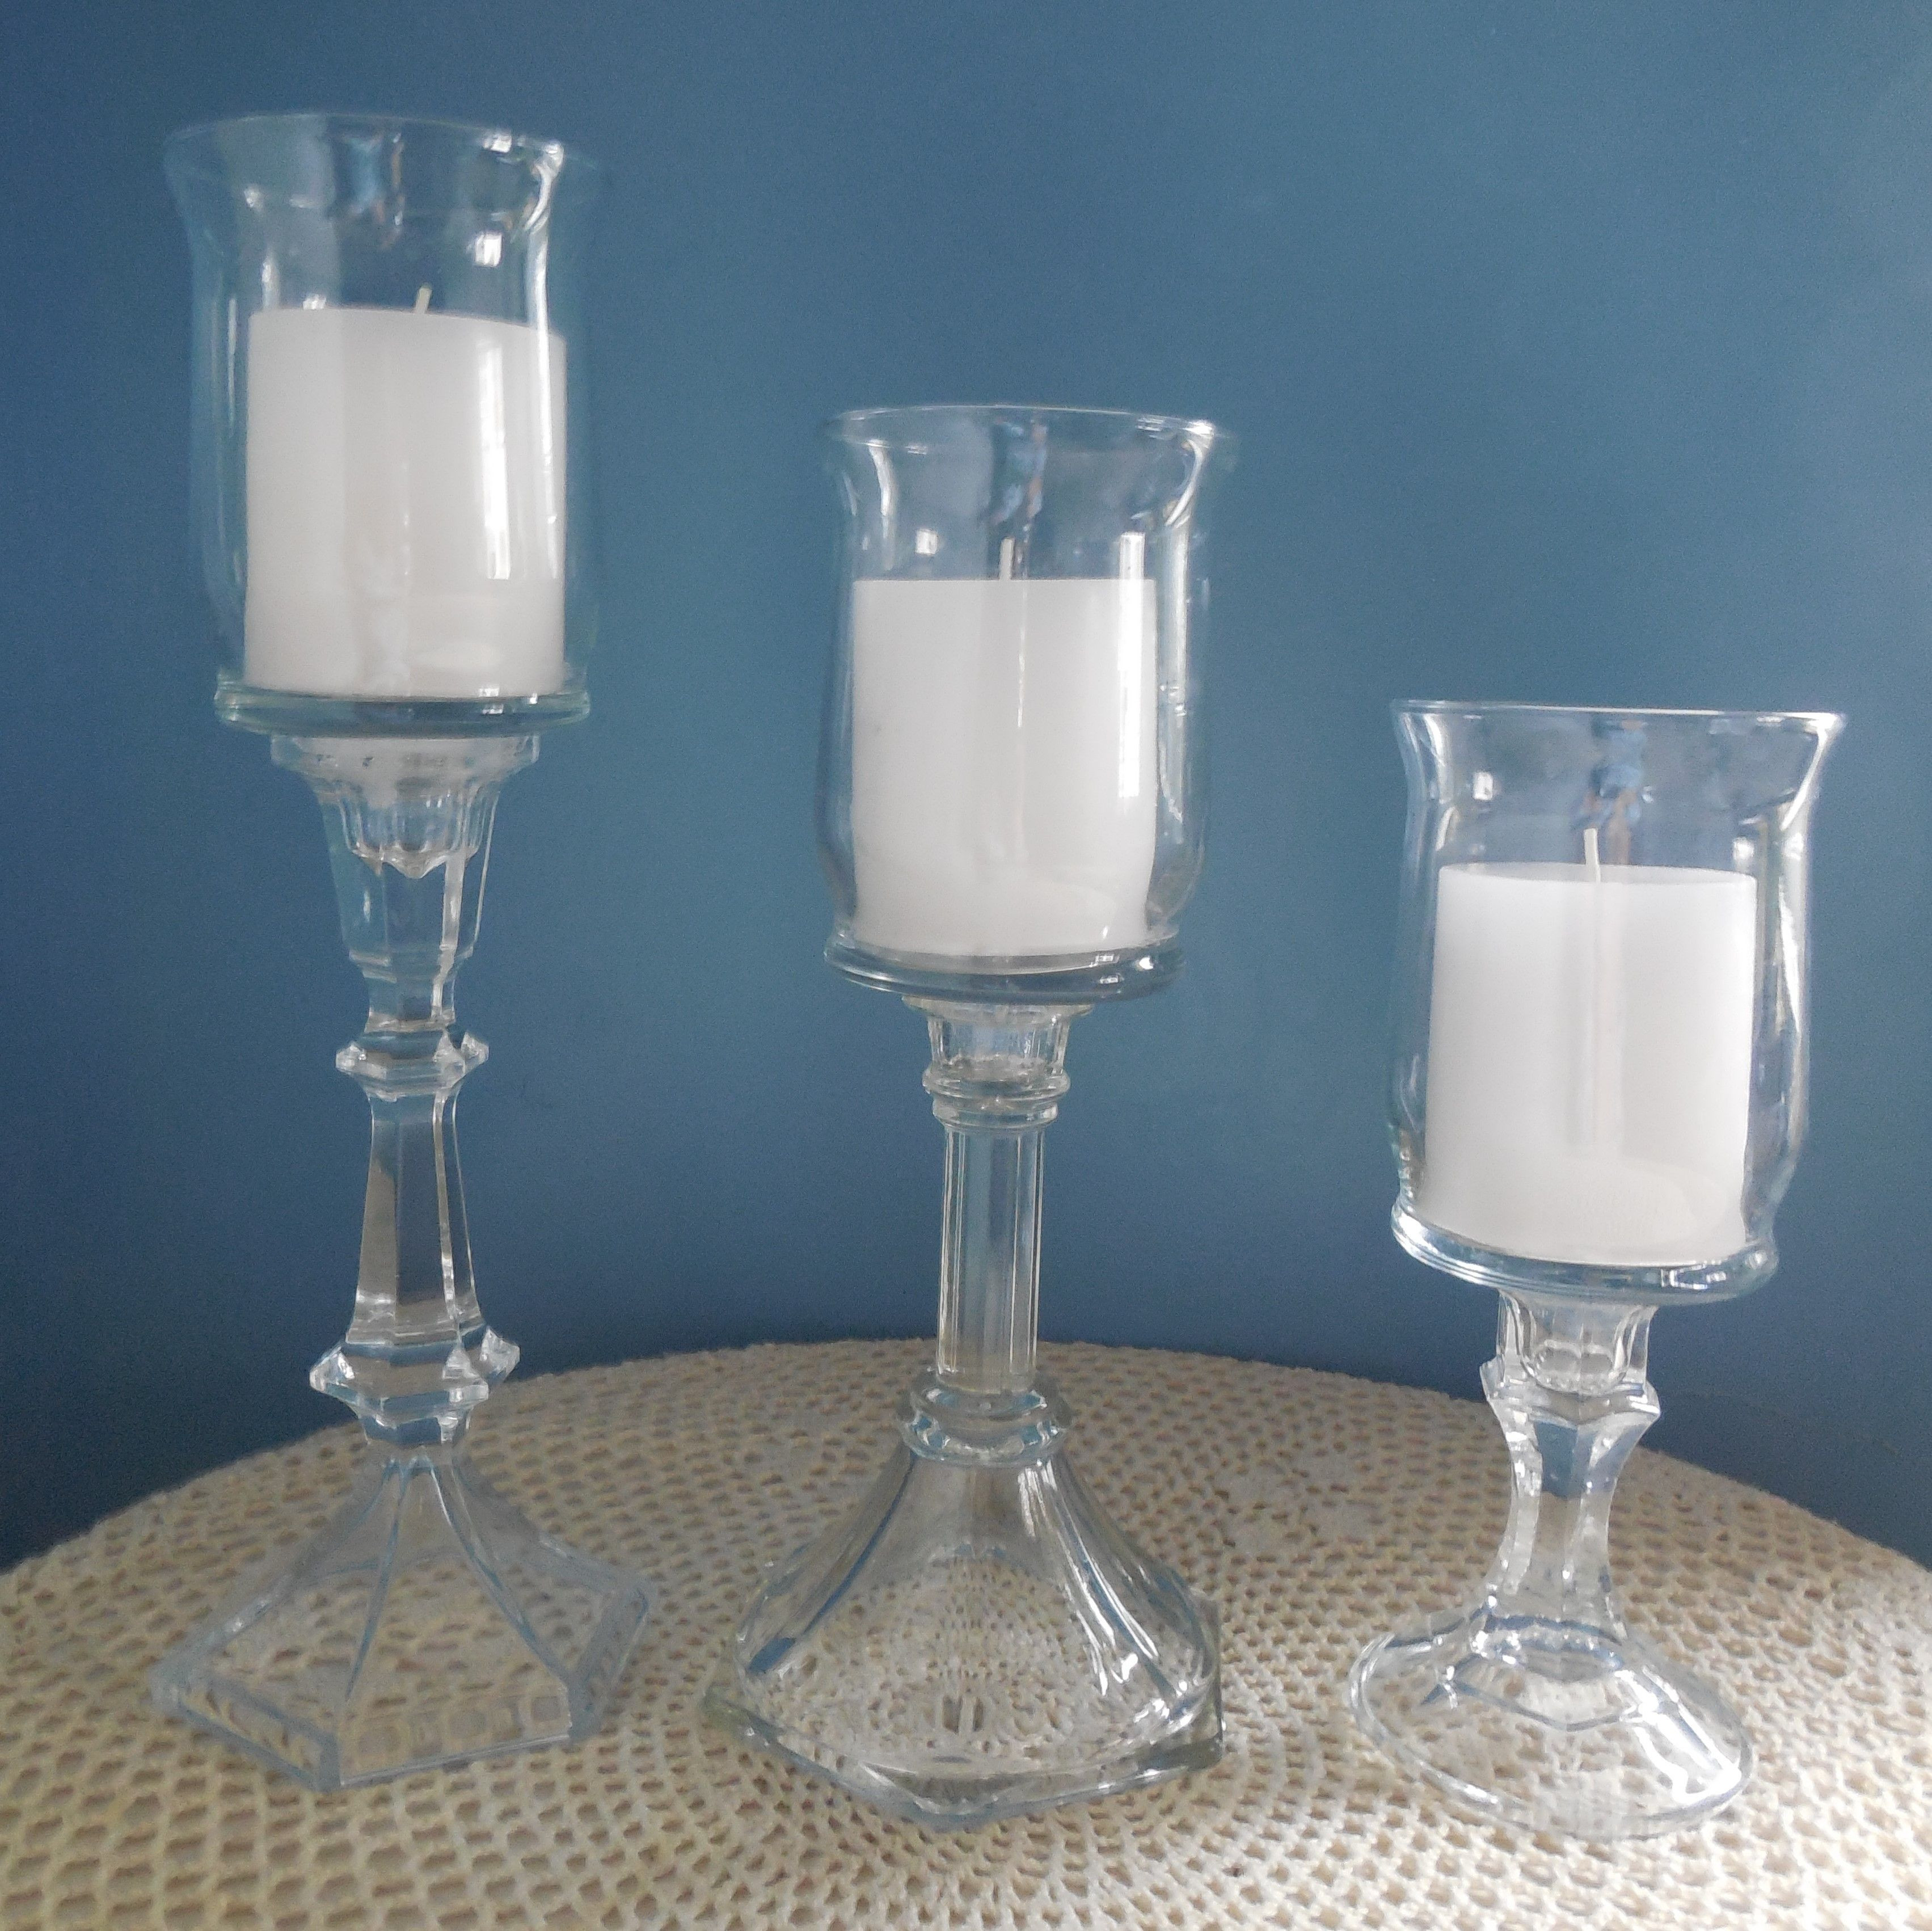 27 Popular Dollar Tree Hurricane Vase 2024 free download dollar tree hurricane vase of glass thrift store candle sticks dollar tree hurricane candle with glass thrift store candle sticks dollar tree hurricane candle holders held together with kraz